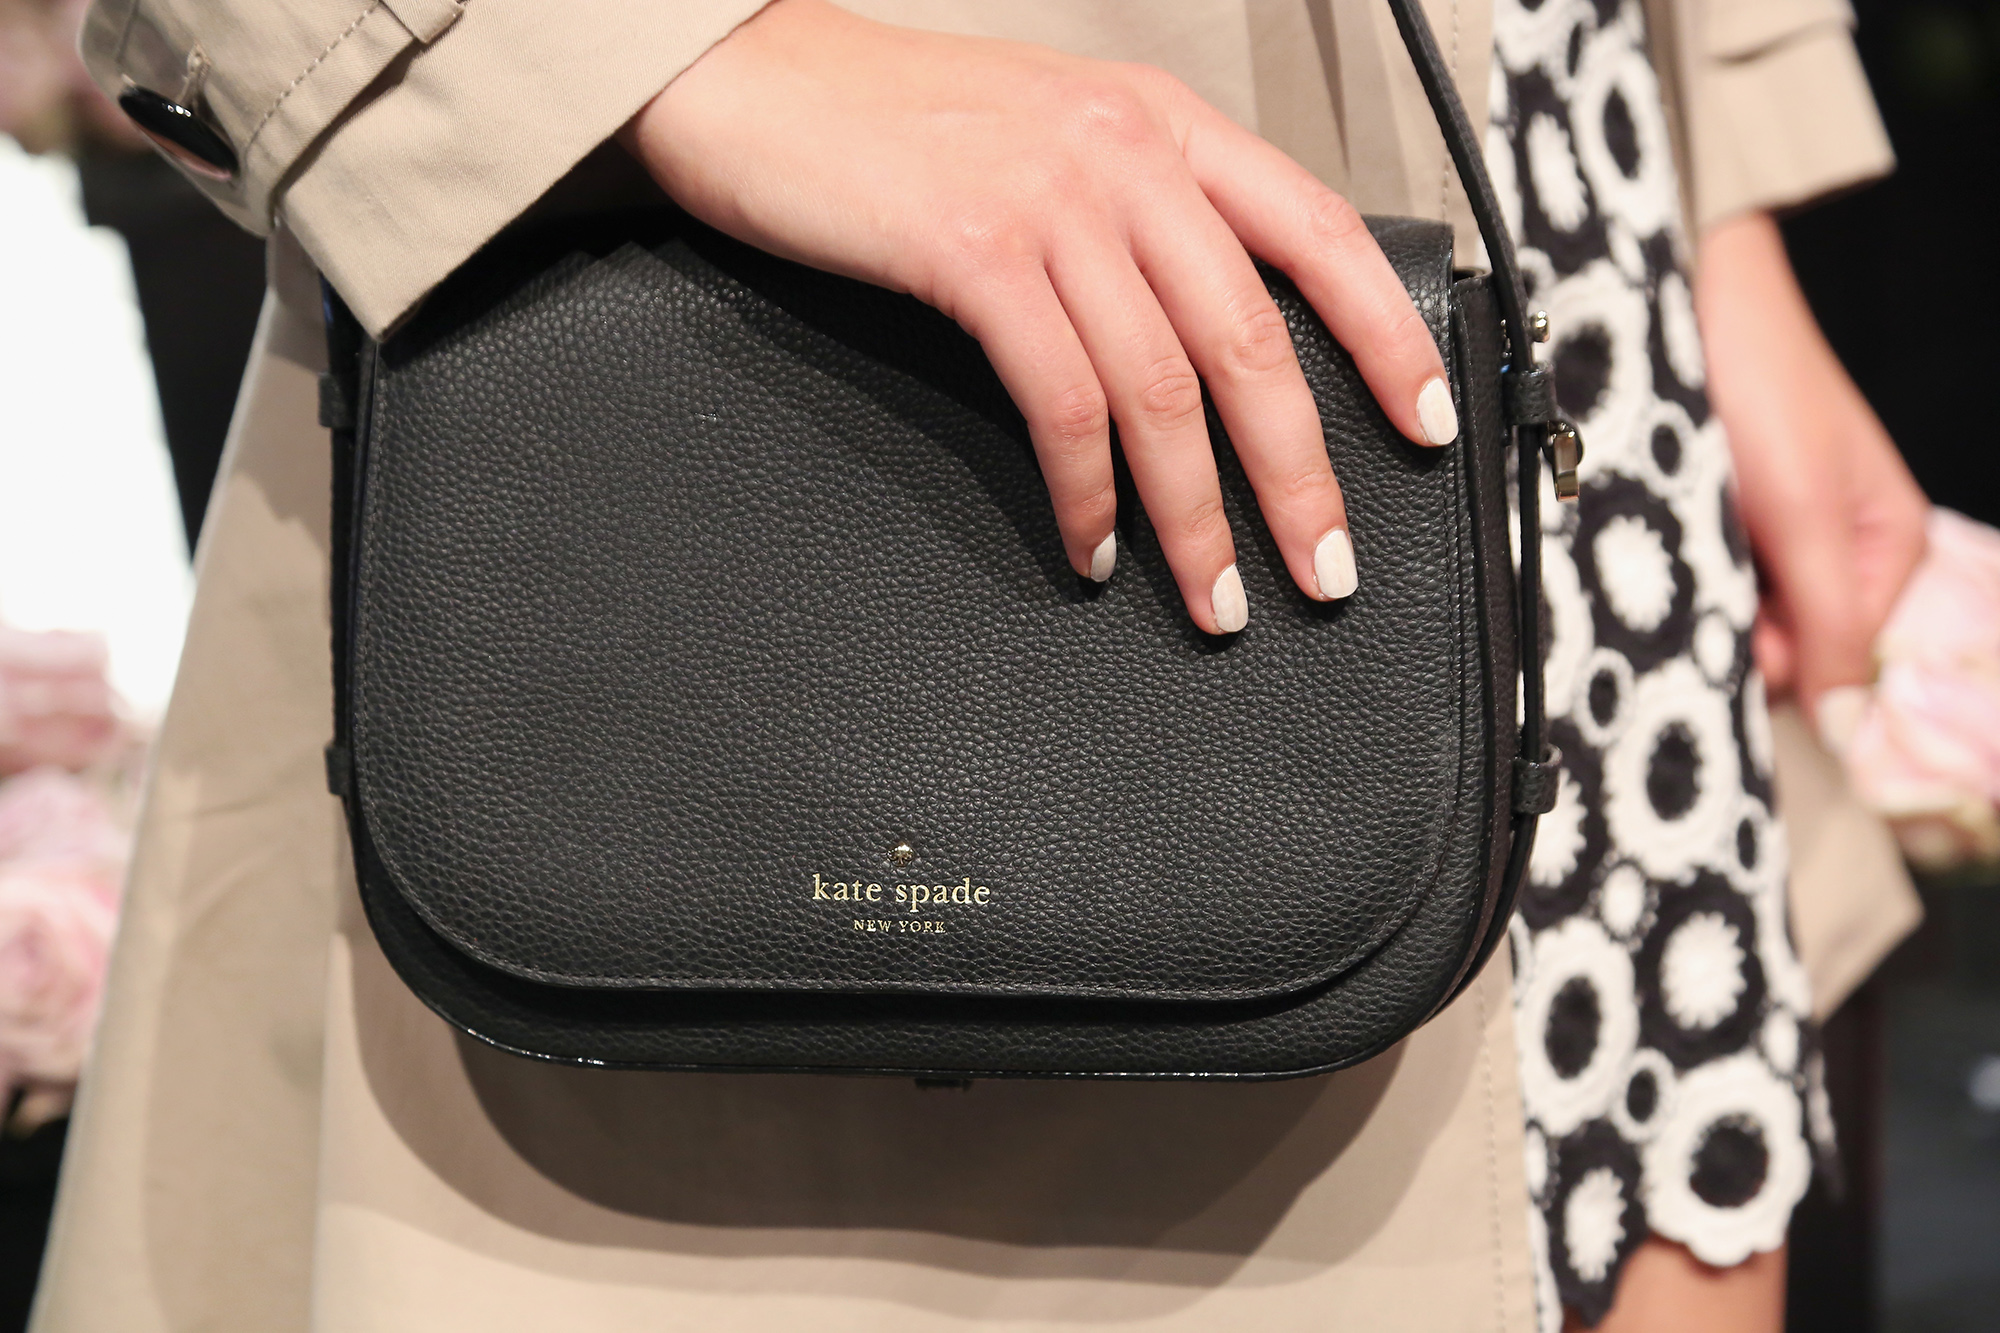 Your Guide About the Kate Spade Inside Bag Tag - Democratic Luxe 2023